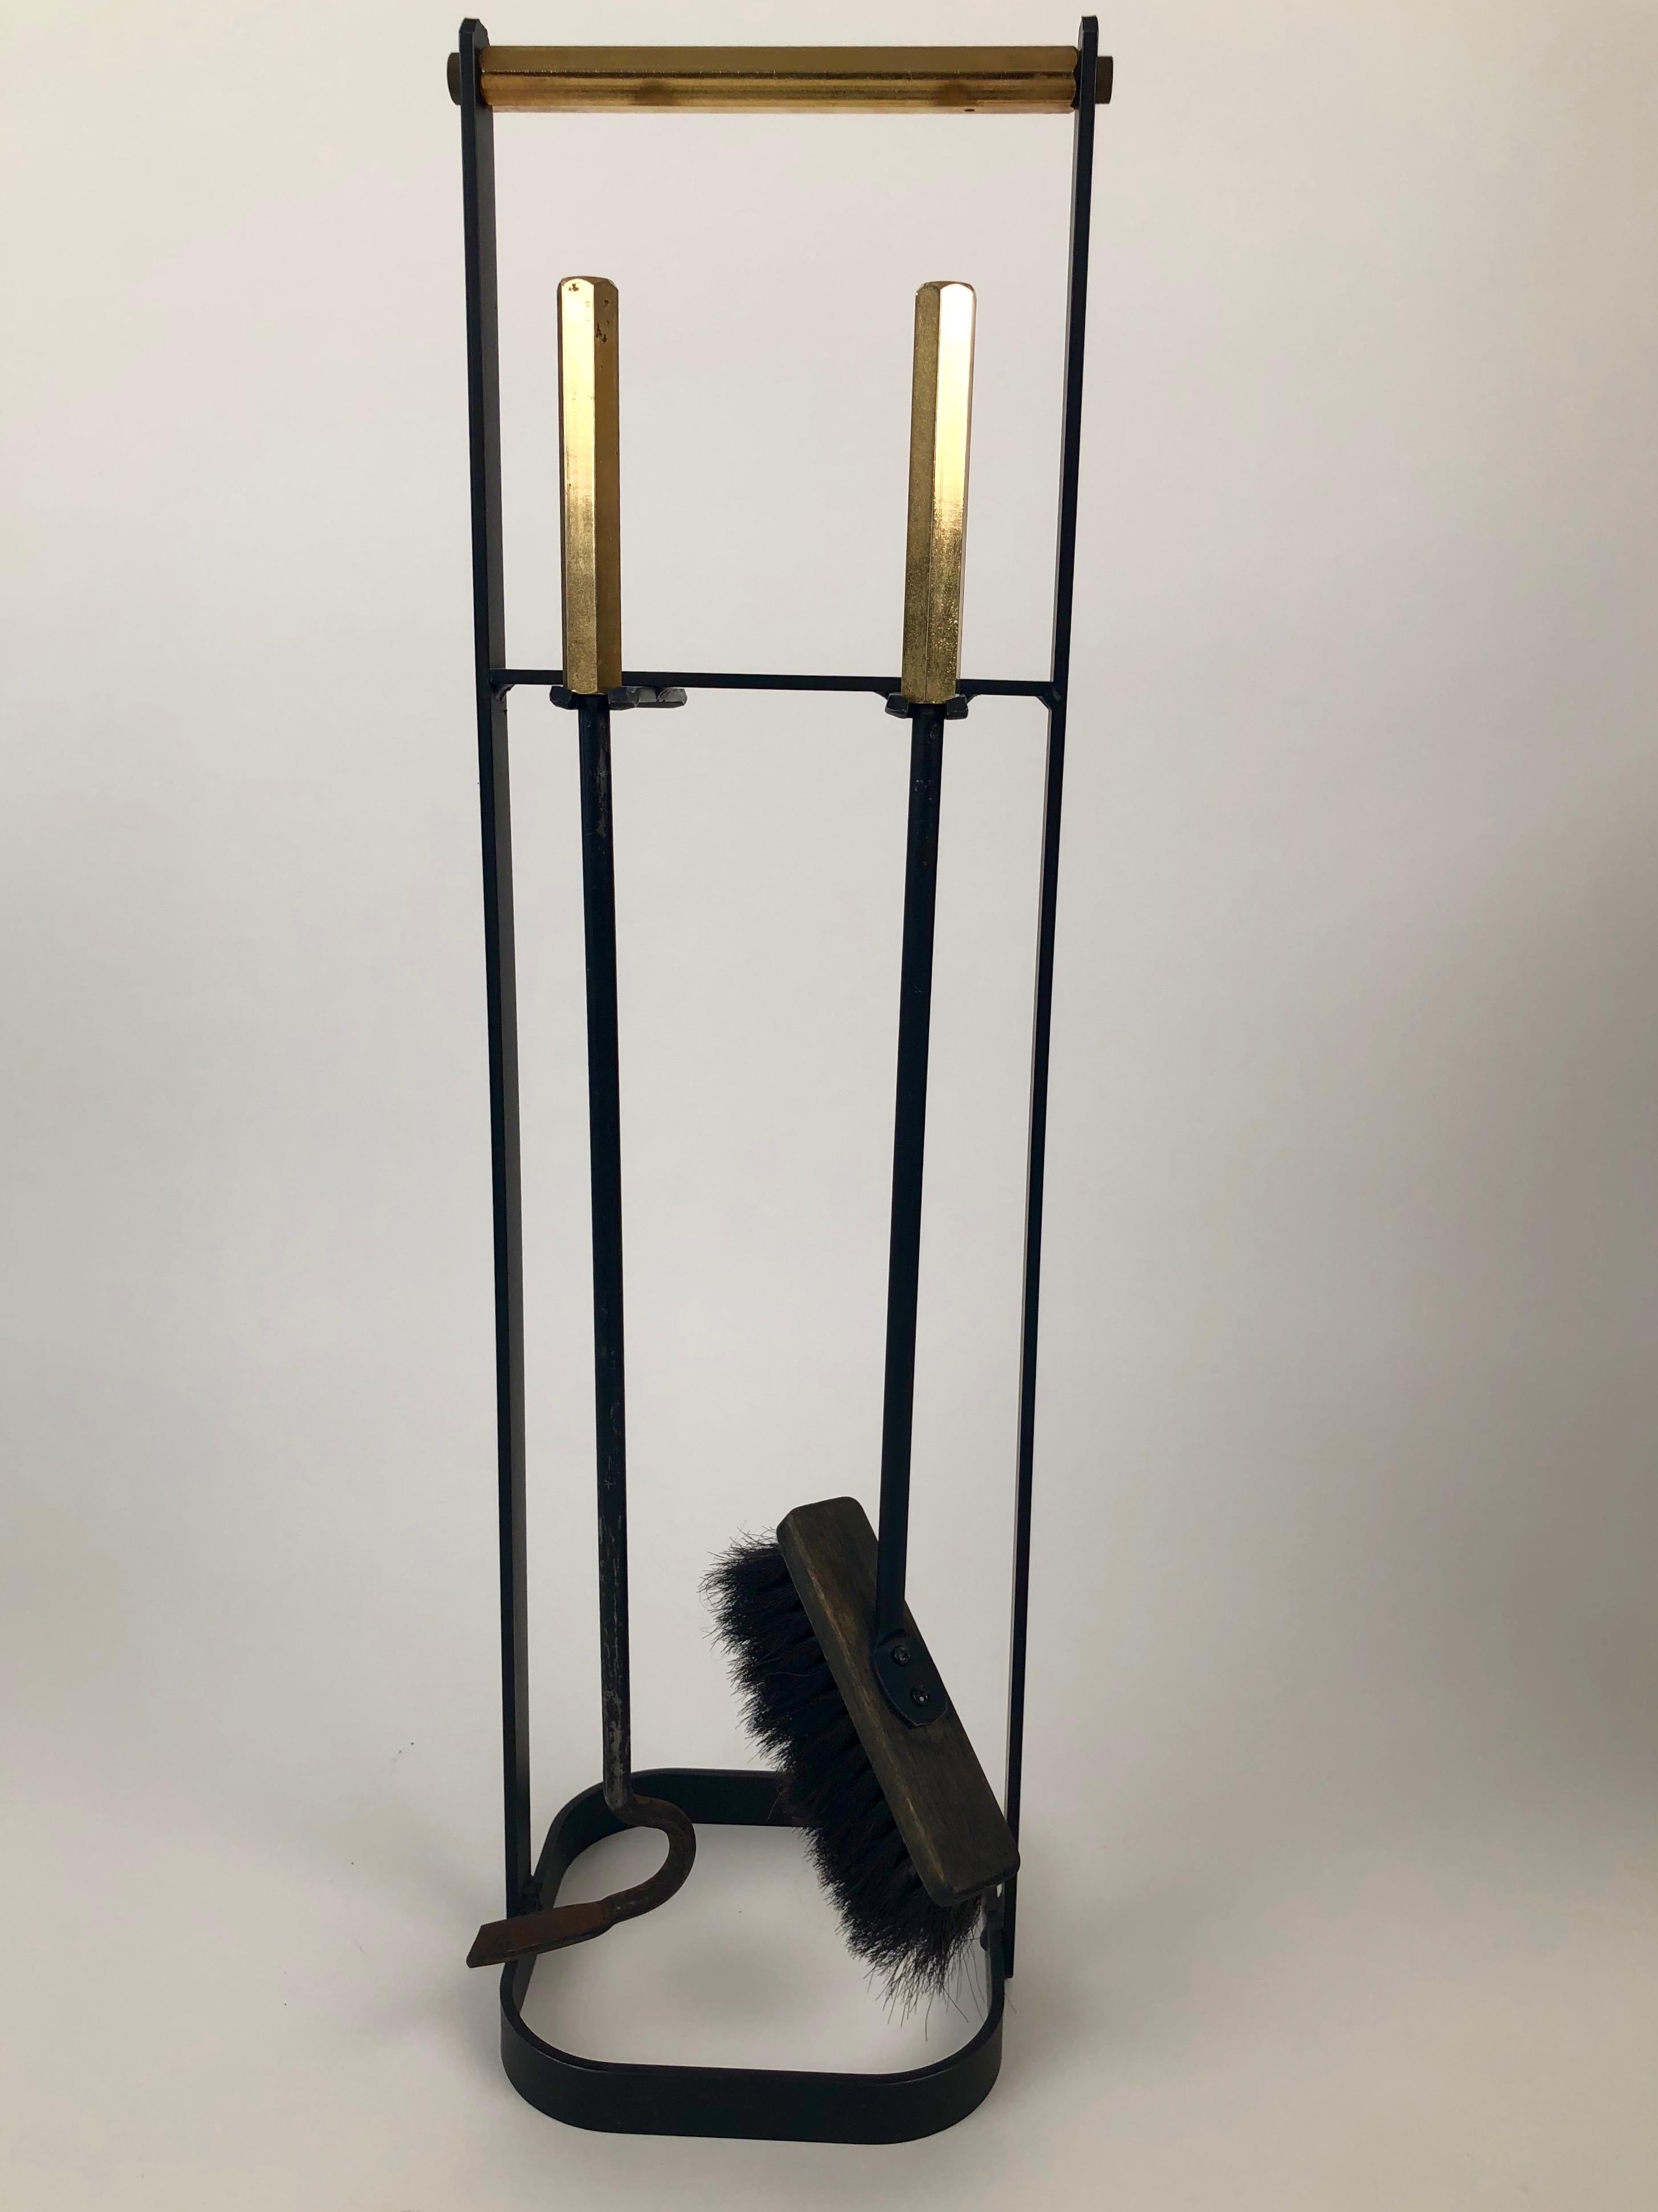 Forged Midcentury, Wrought Iron Fireplace Tools with Brass Handles from the 1960s